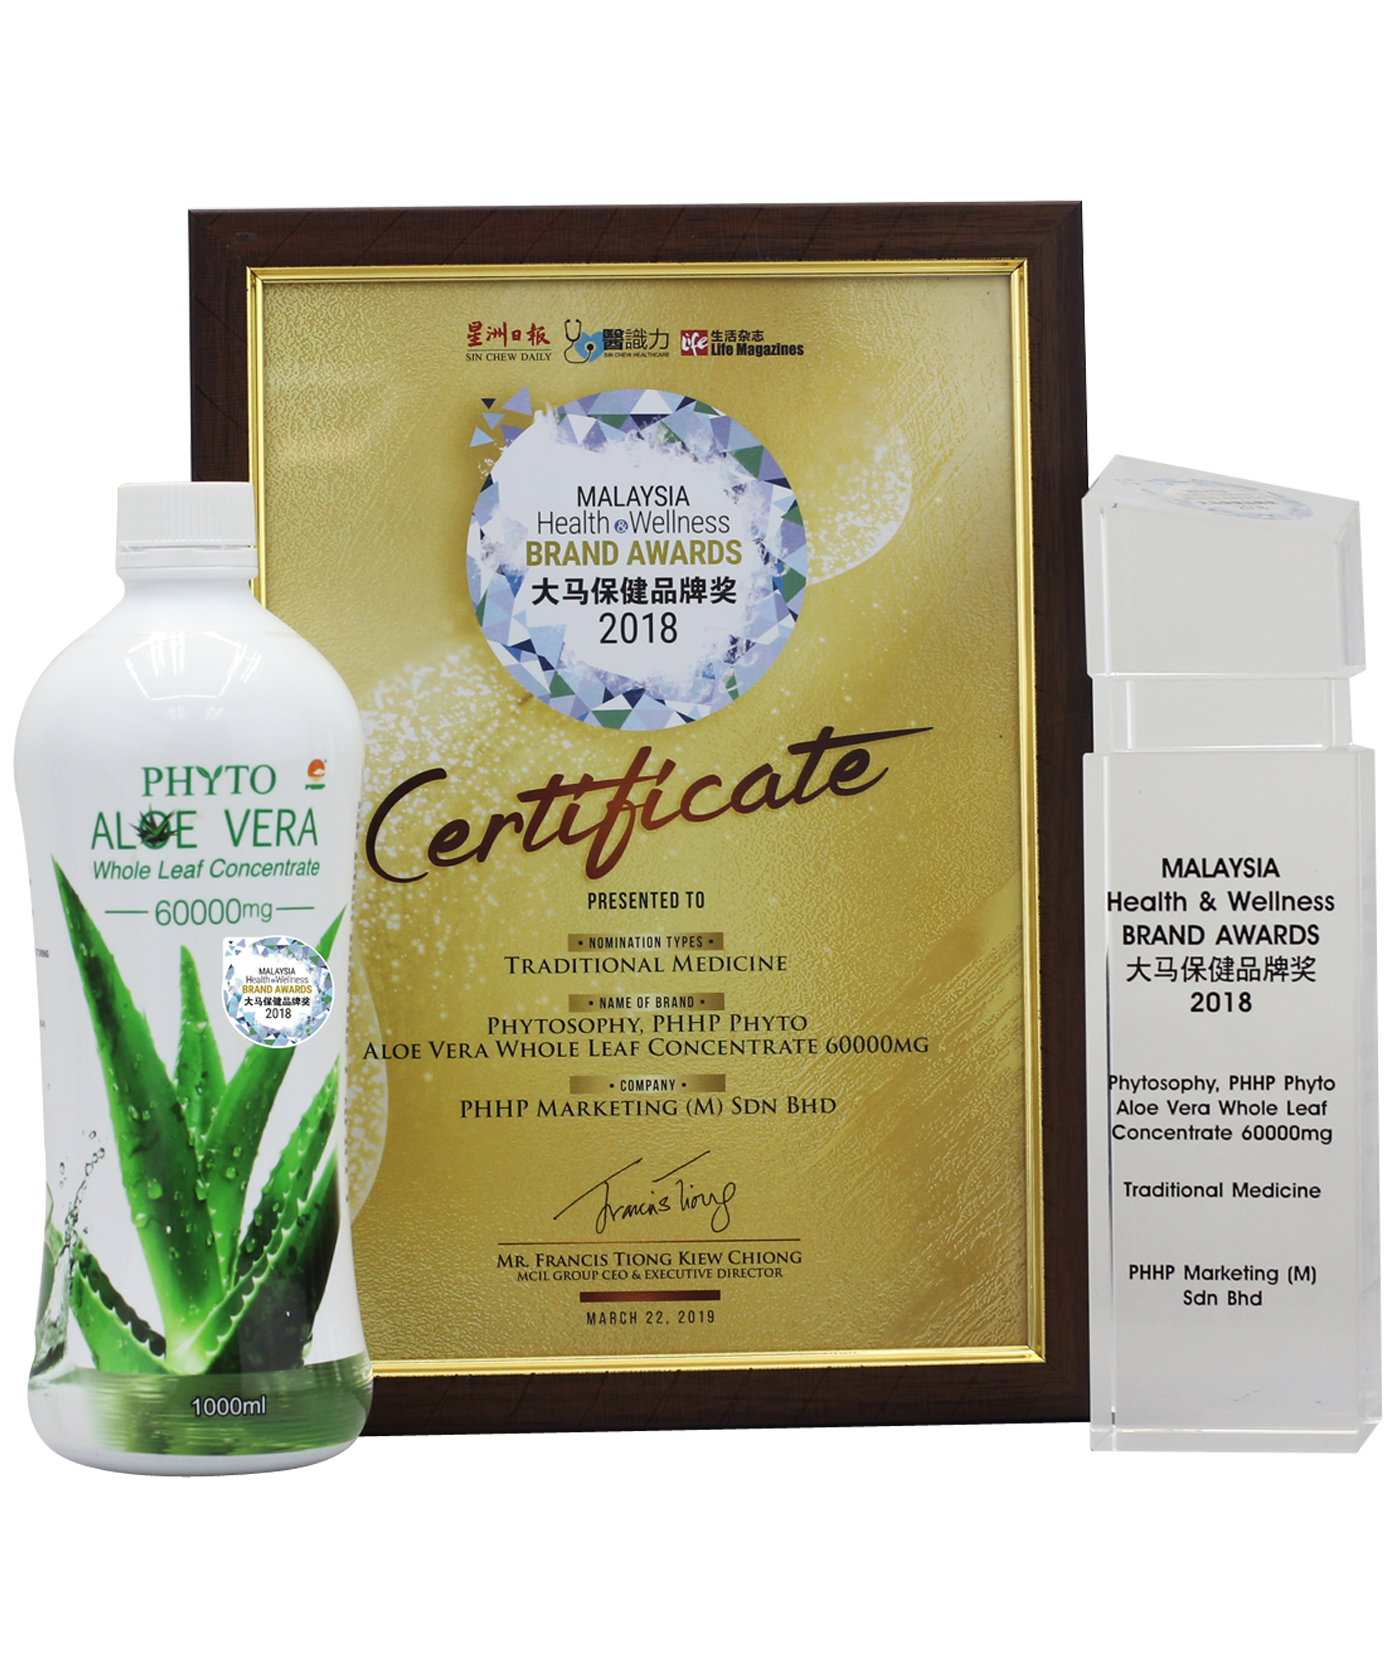 Phytosophy Phyto Aloe Vera Whole Leaf Concentrate 60000mg